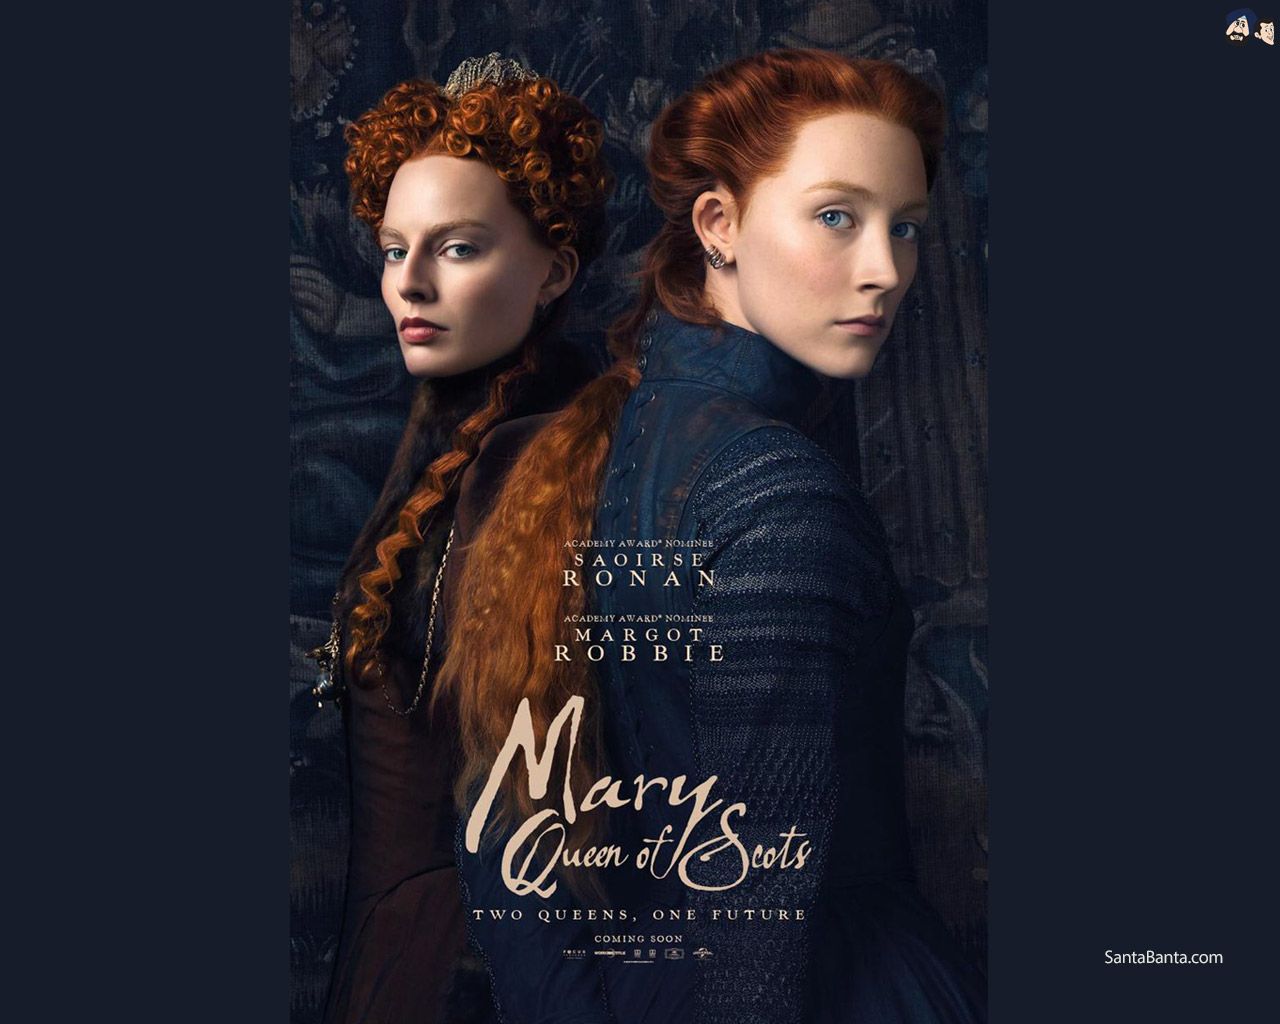 Poster of Mary Queen of Scots starring Saoirse Ronan and Margot